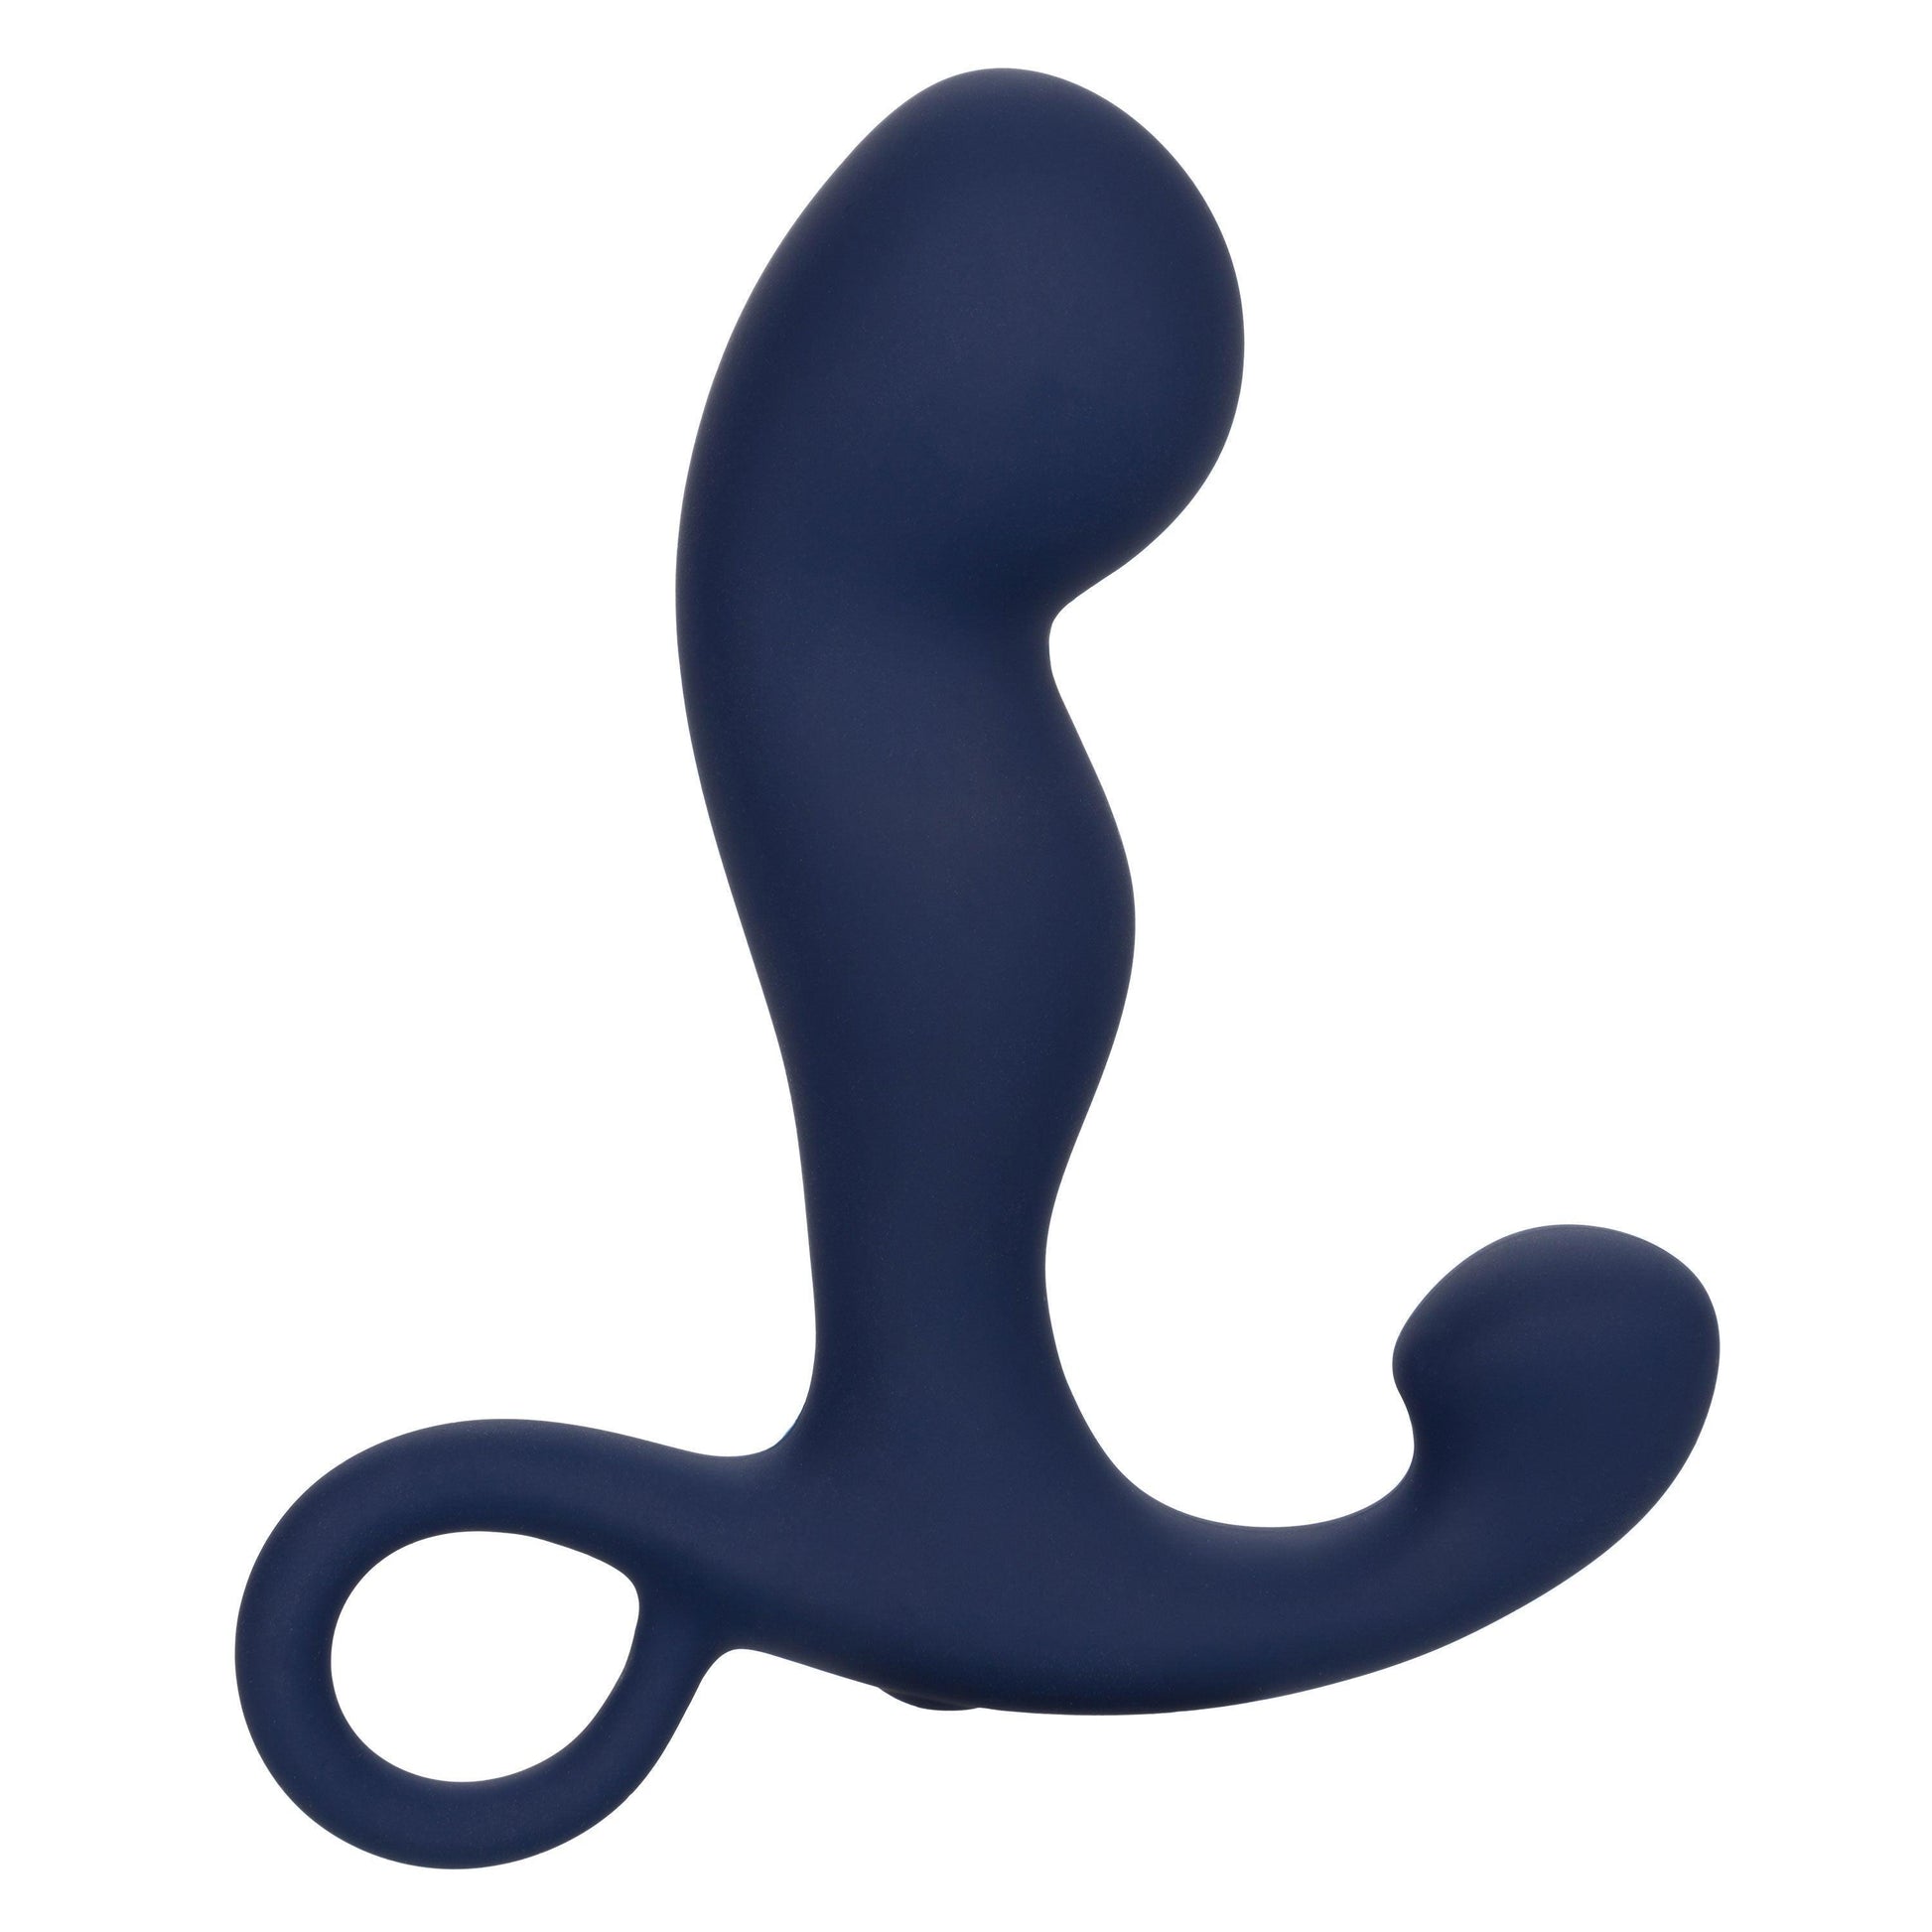 Viceroy Rechargeable Command Probe - Blue - My Sex Toy Hub